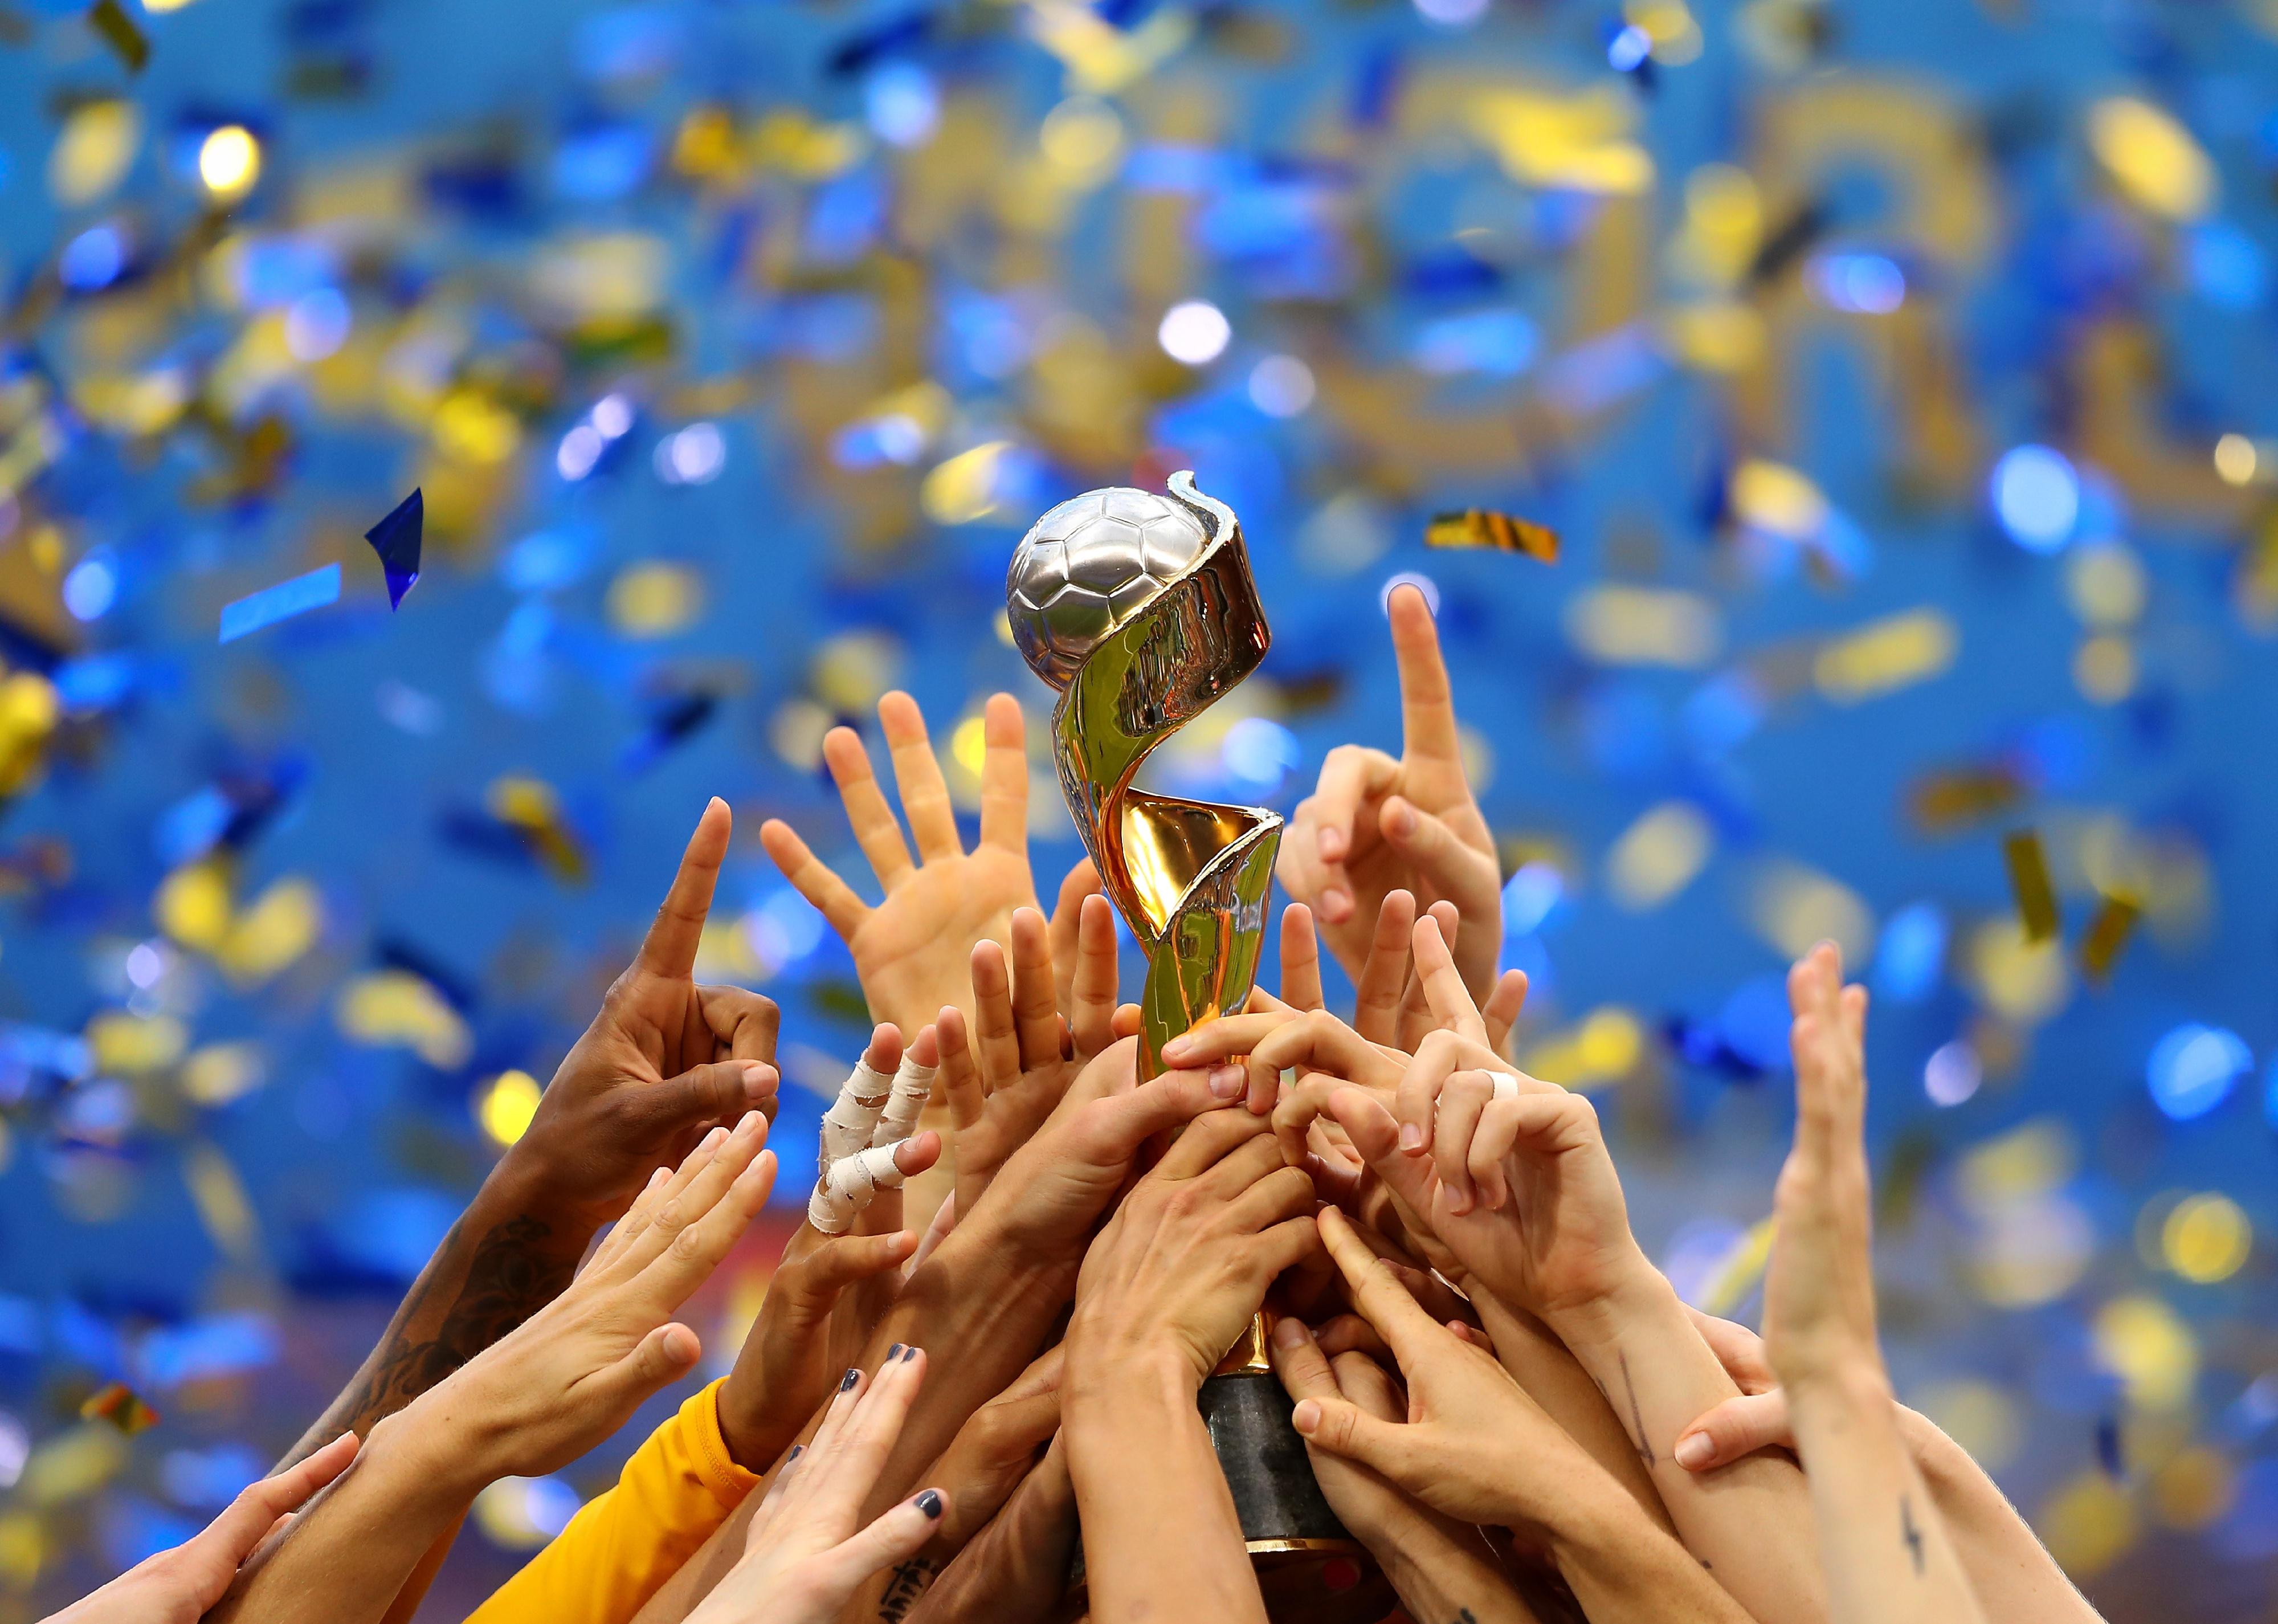 The USA team's hands reaching up to the trophy with confetti in the background.